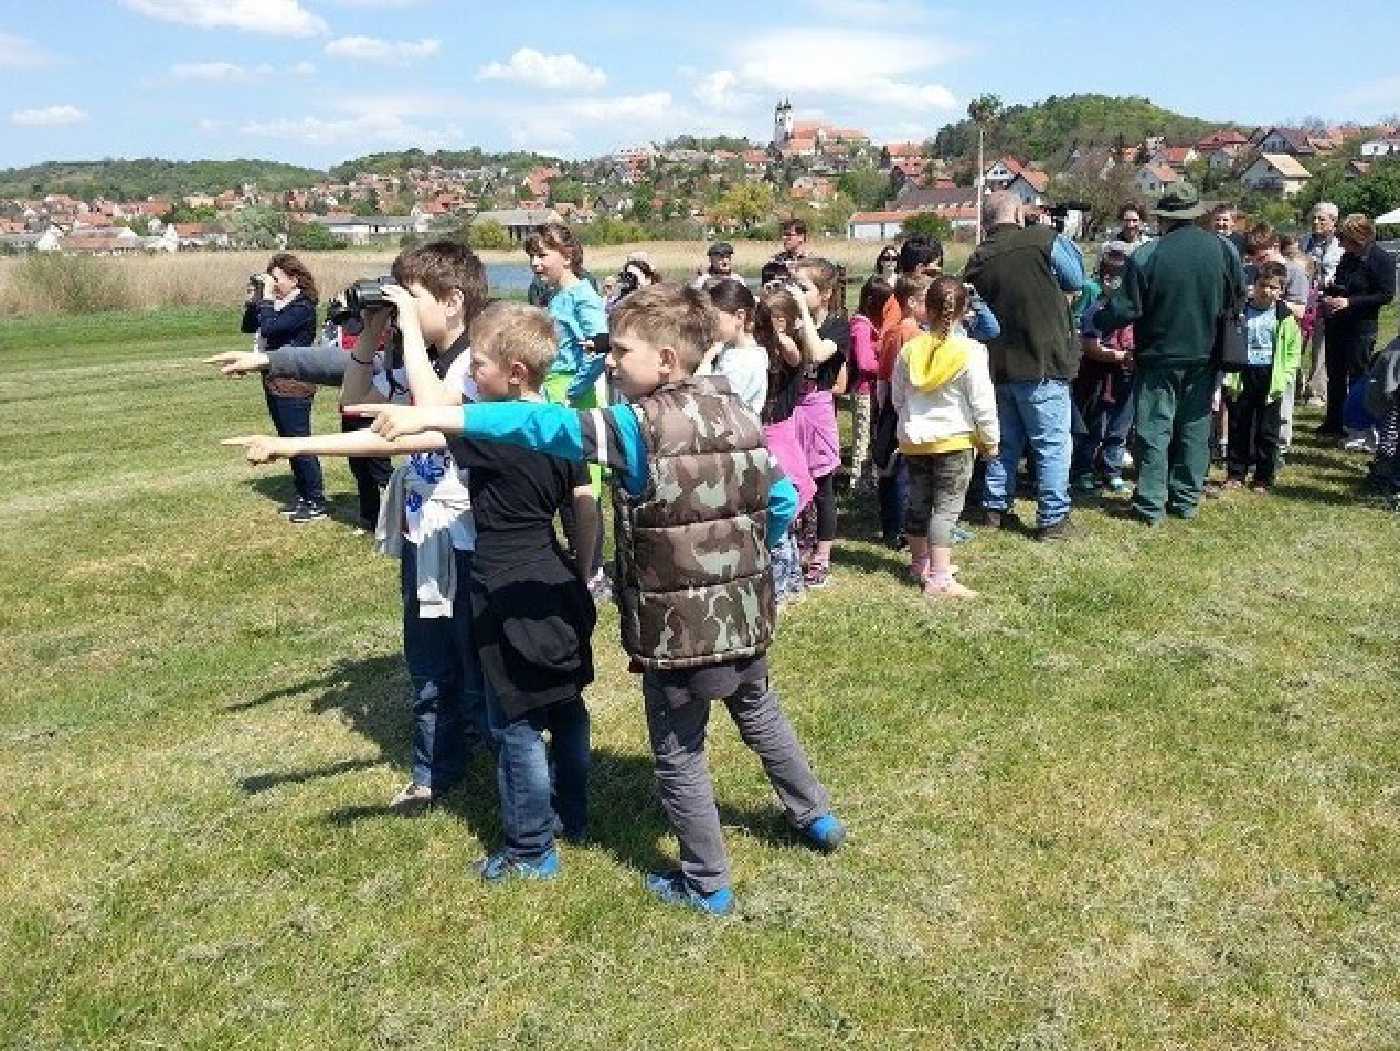 Children counting ground squirrels (<em>Spermophilus citellus</em>) in a Wilderness Watch event in the Tihany peninsula (source: Botond Bakó)